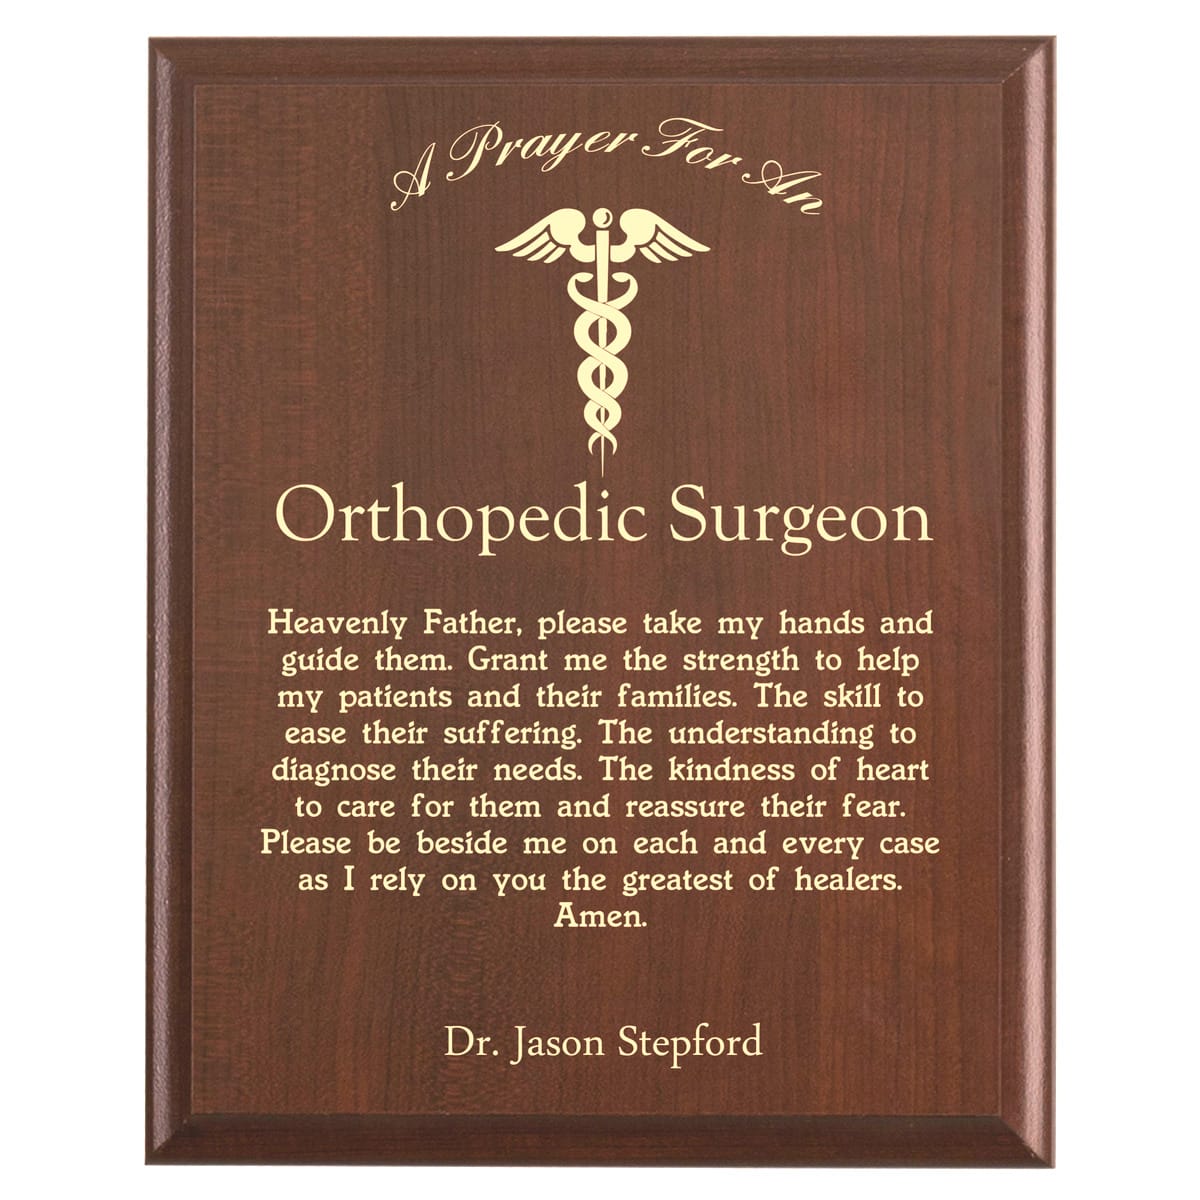 Plaque photo: Orthopedic Surgeon Prayer Plaque design with free personalization. Wood style finish with customized text.